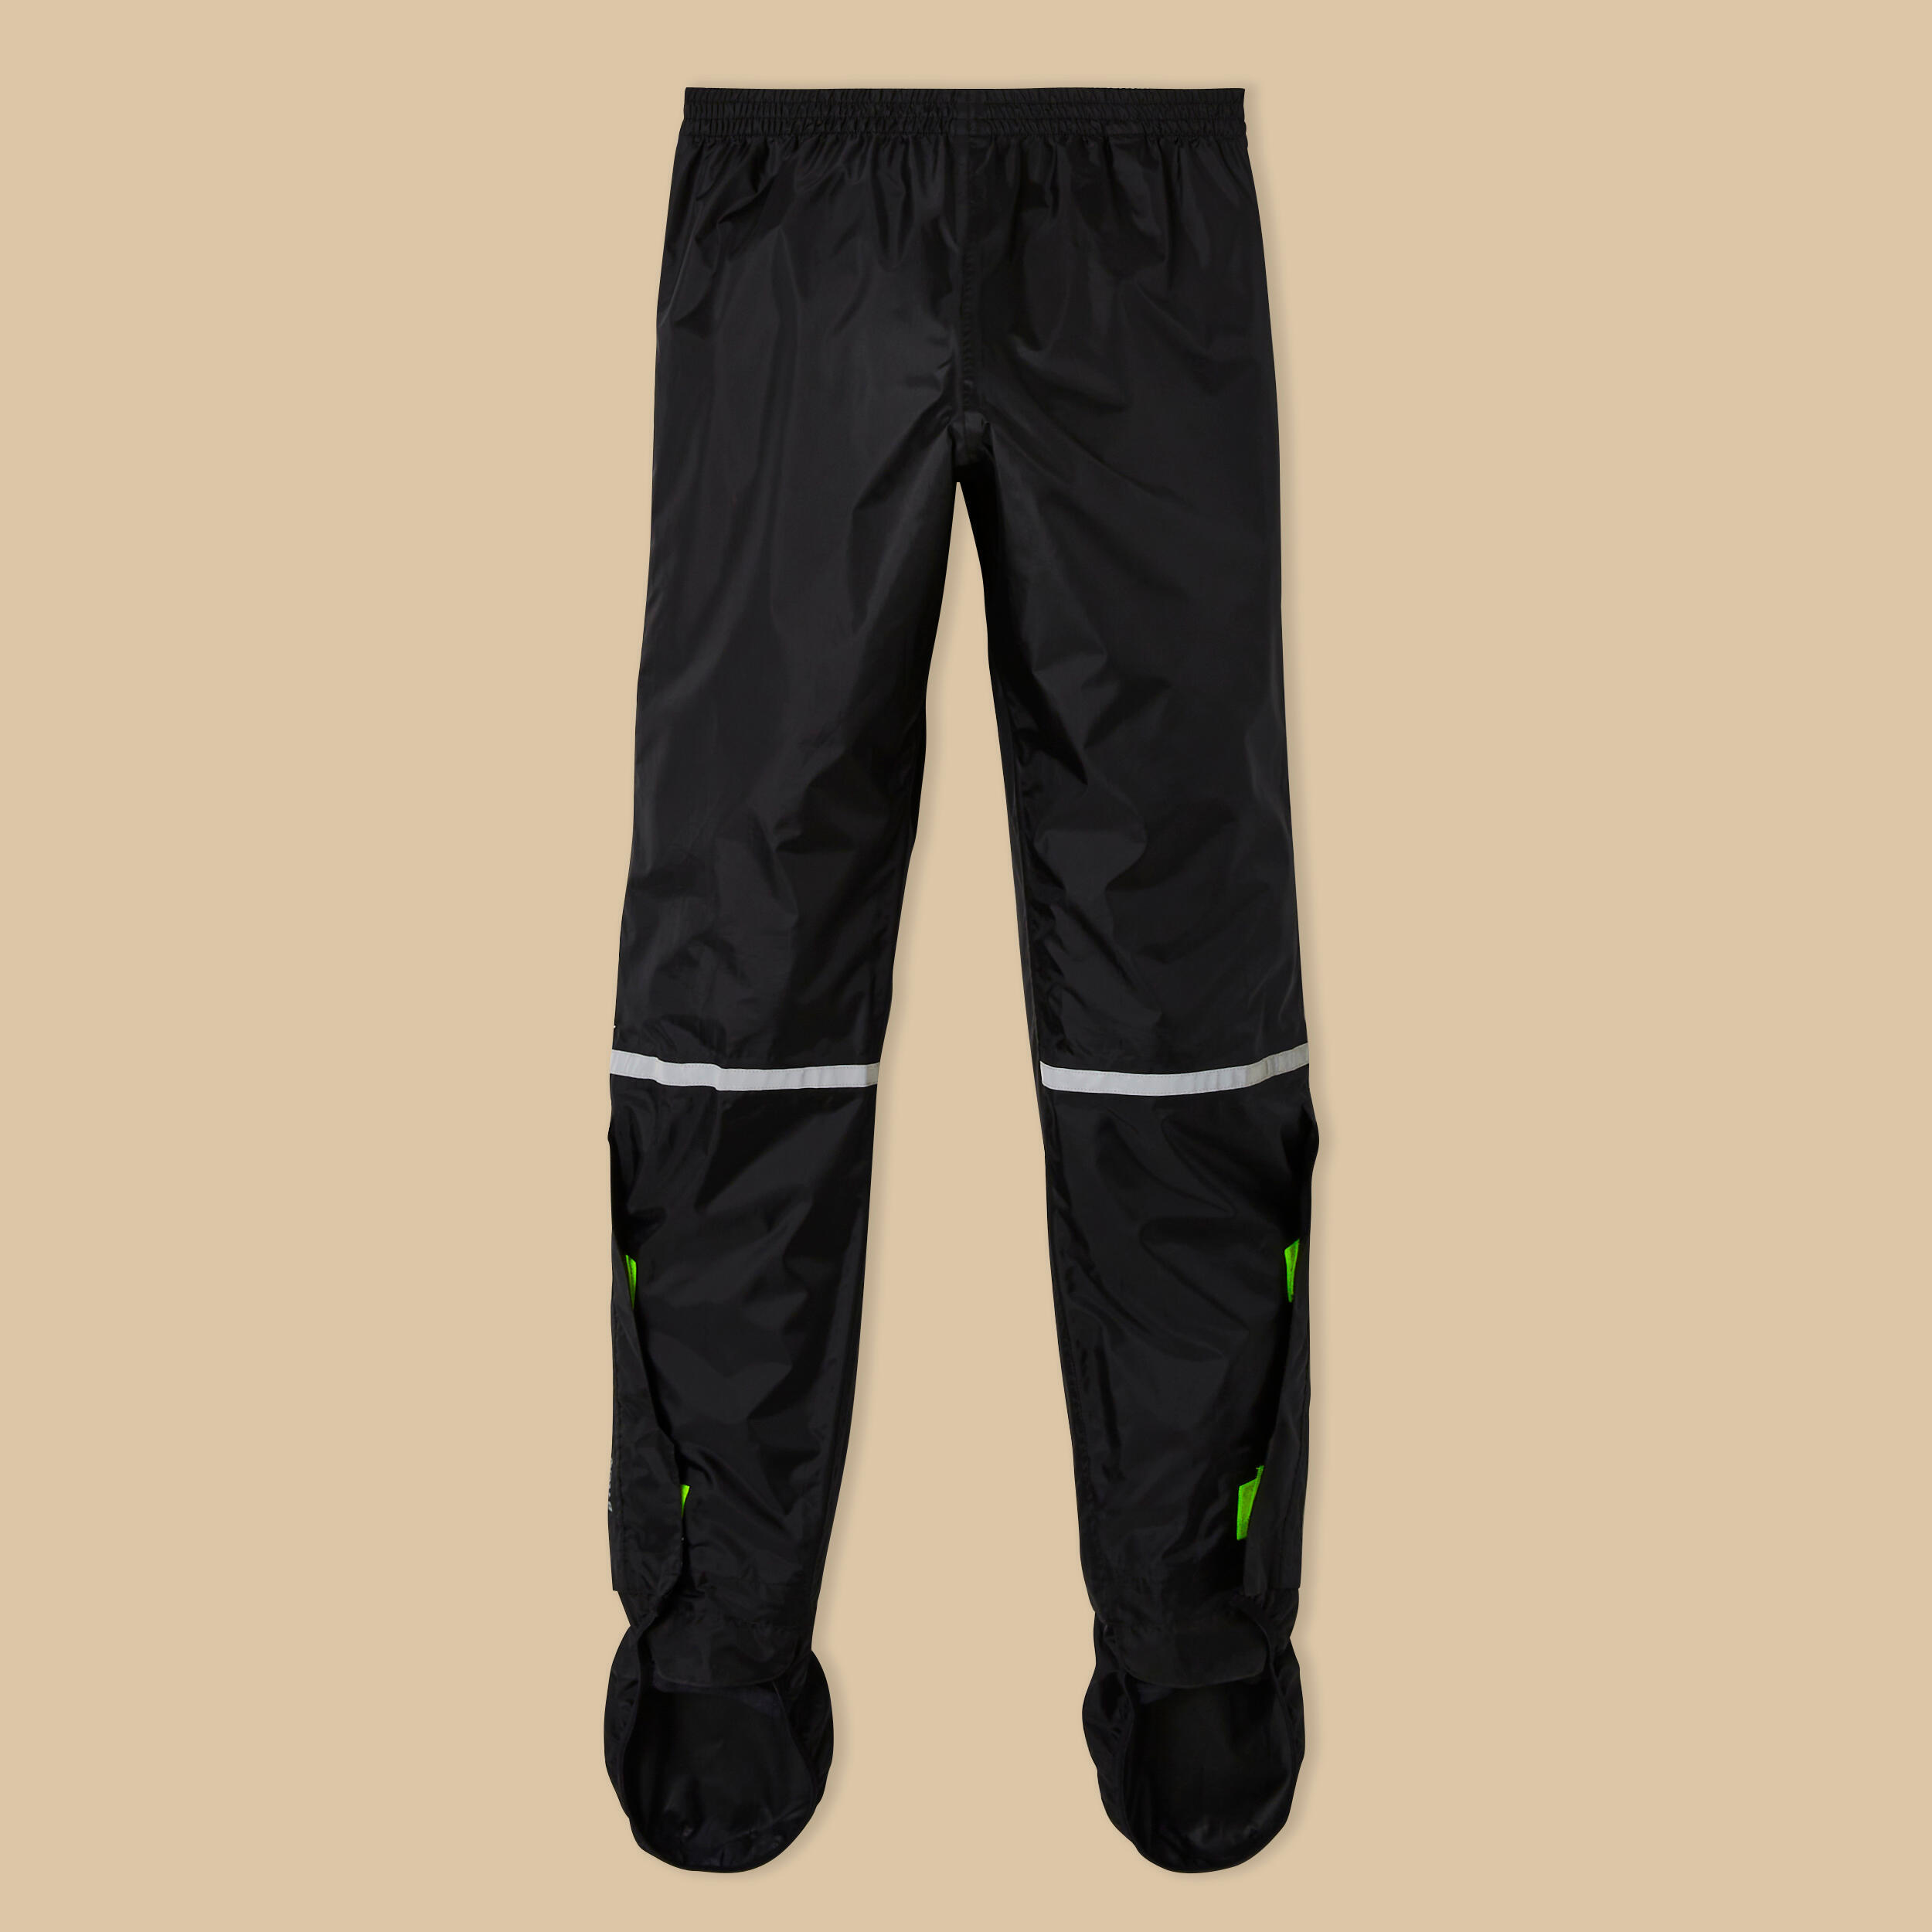 City Cycling Rain Overtrousers with Built-In Overshoes 100 - Black 12/14